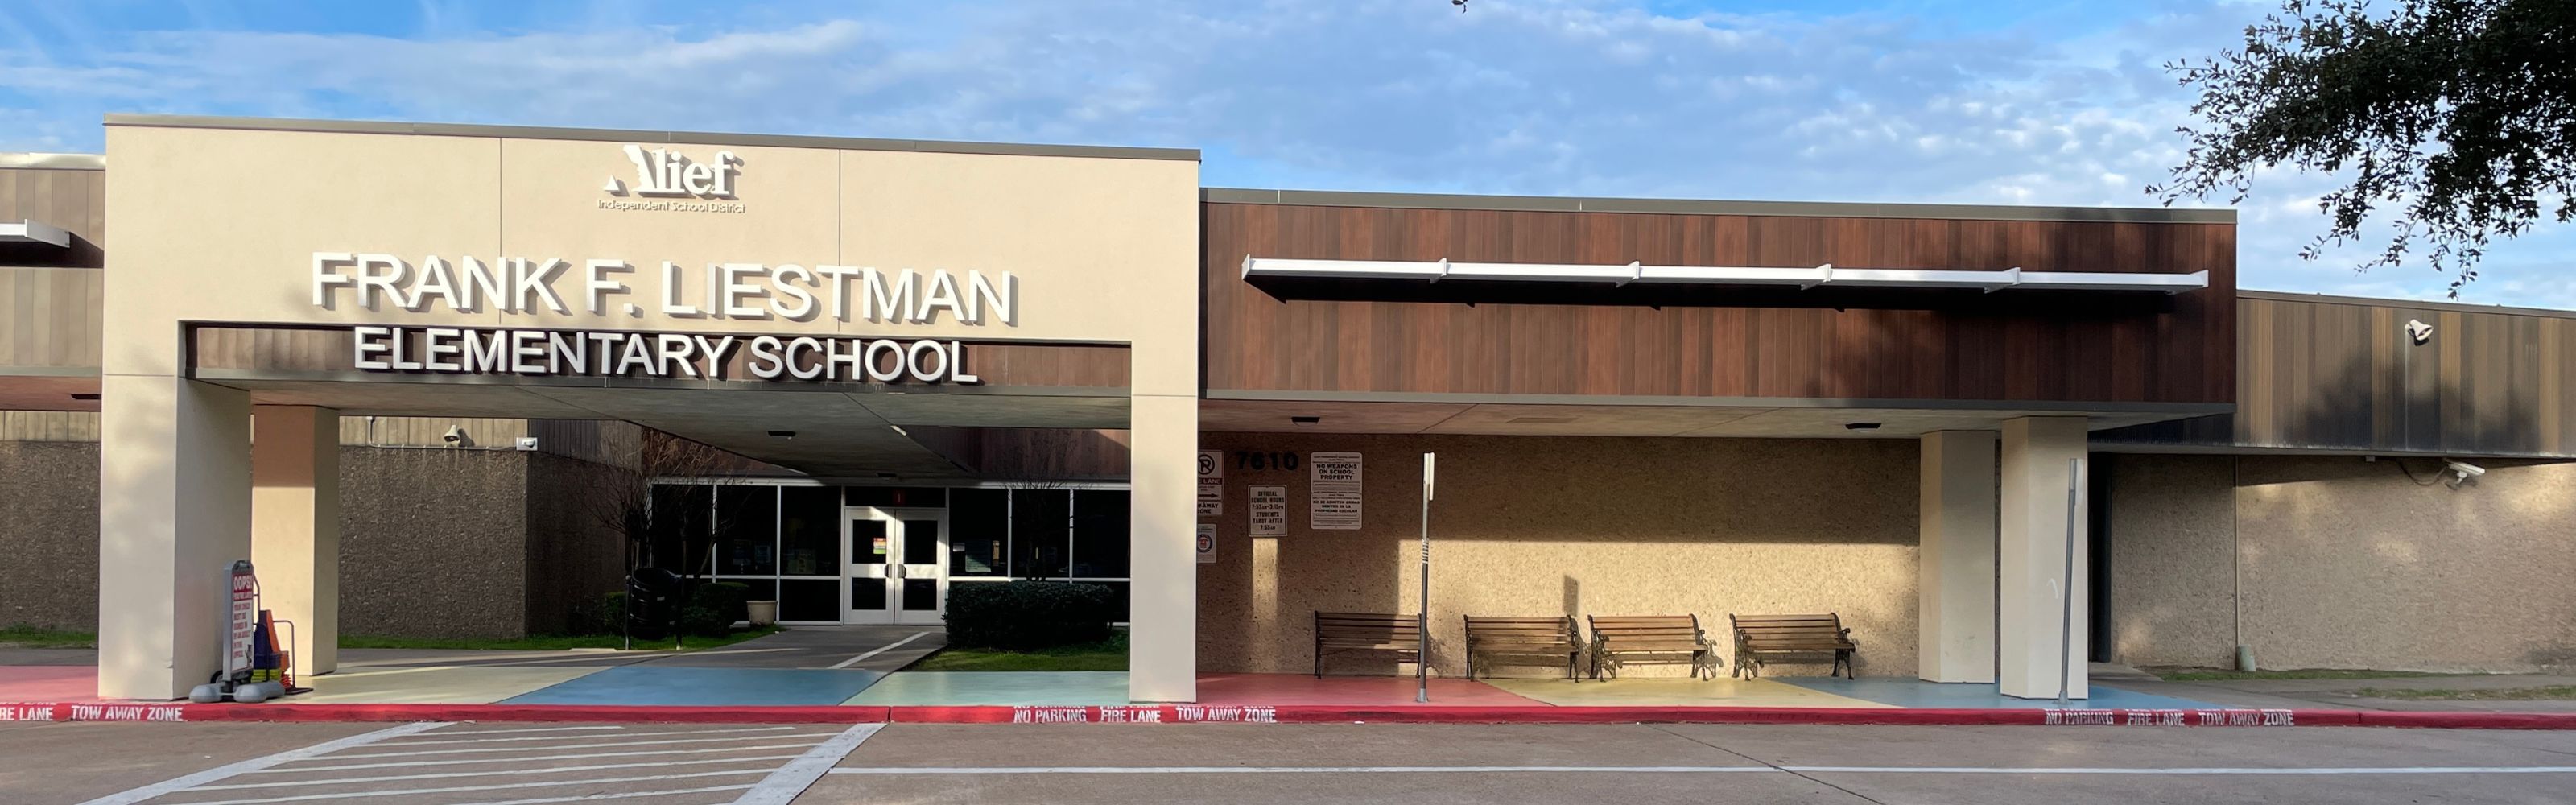 Picture of the front of Liestman Elementary